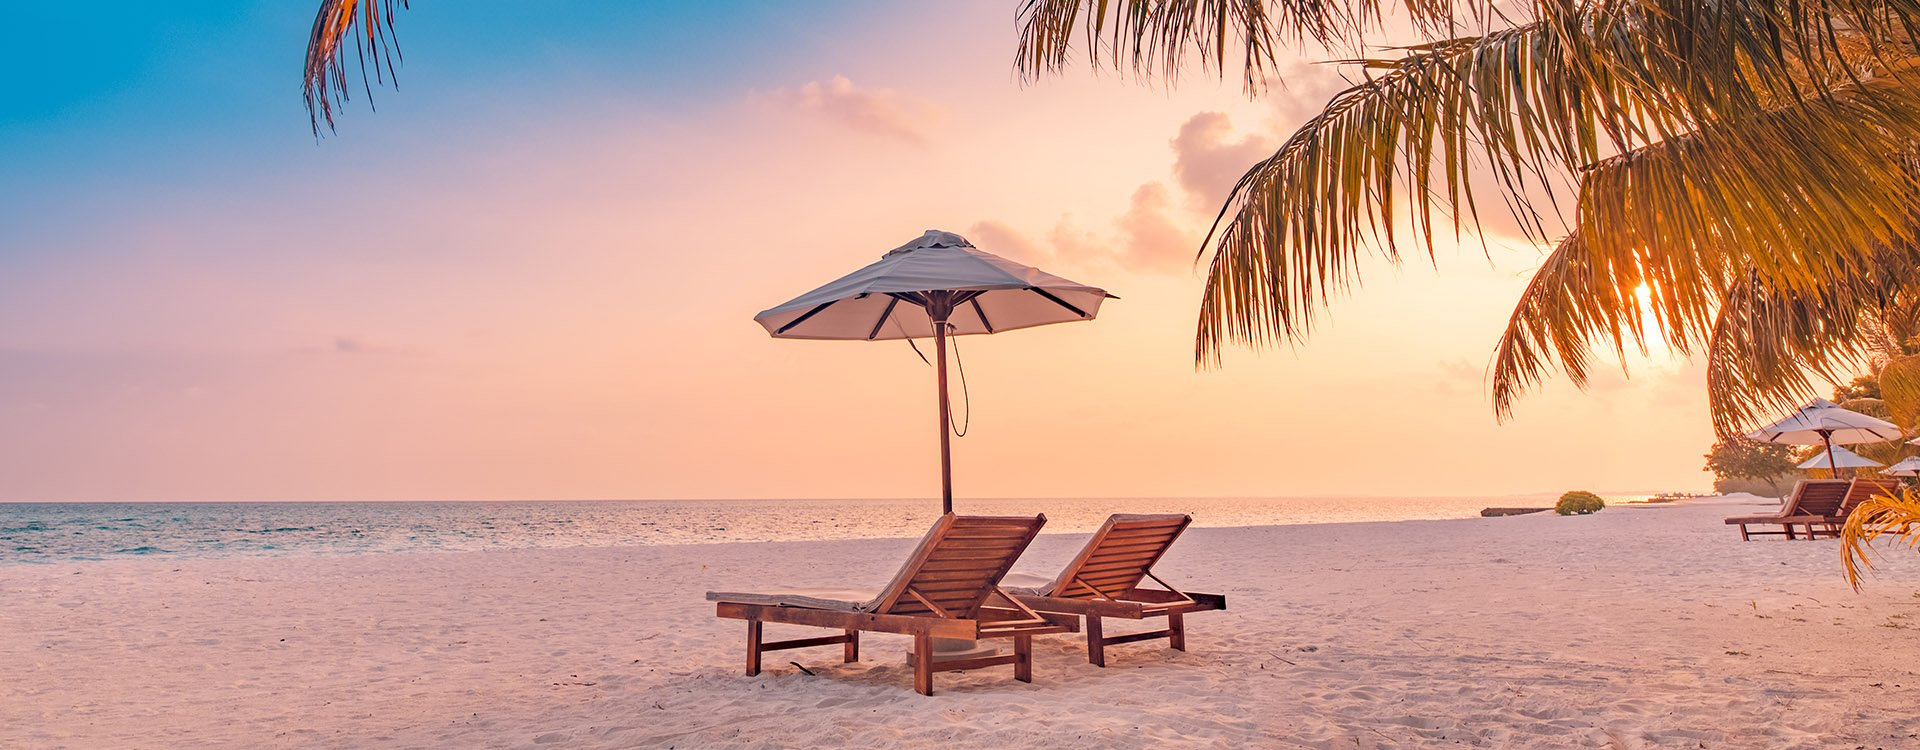 Summer beach landscape. Luxury vacation. Panoramic of sunset beach, two loungers umbrella, palm leaf, colorful sunset sky for paradise island view